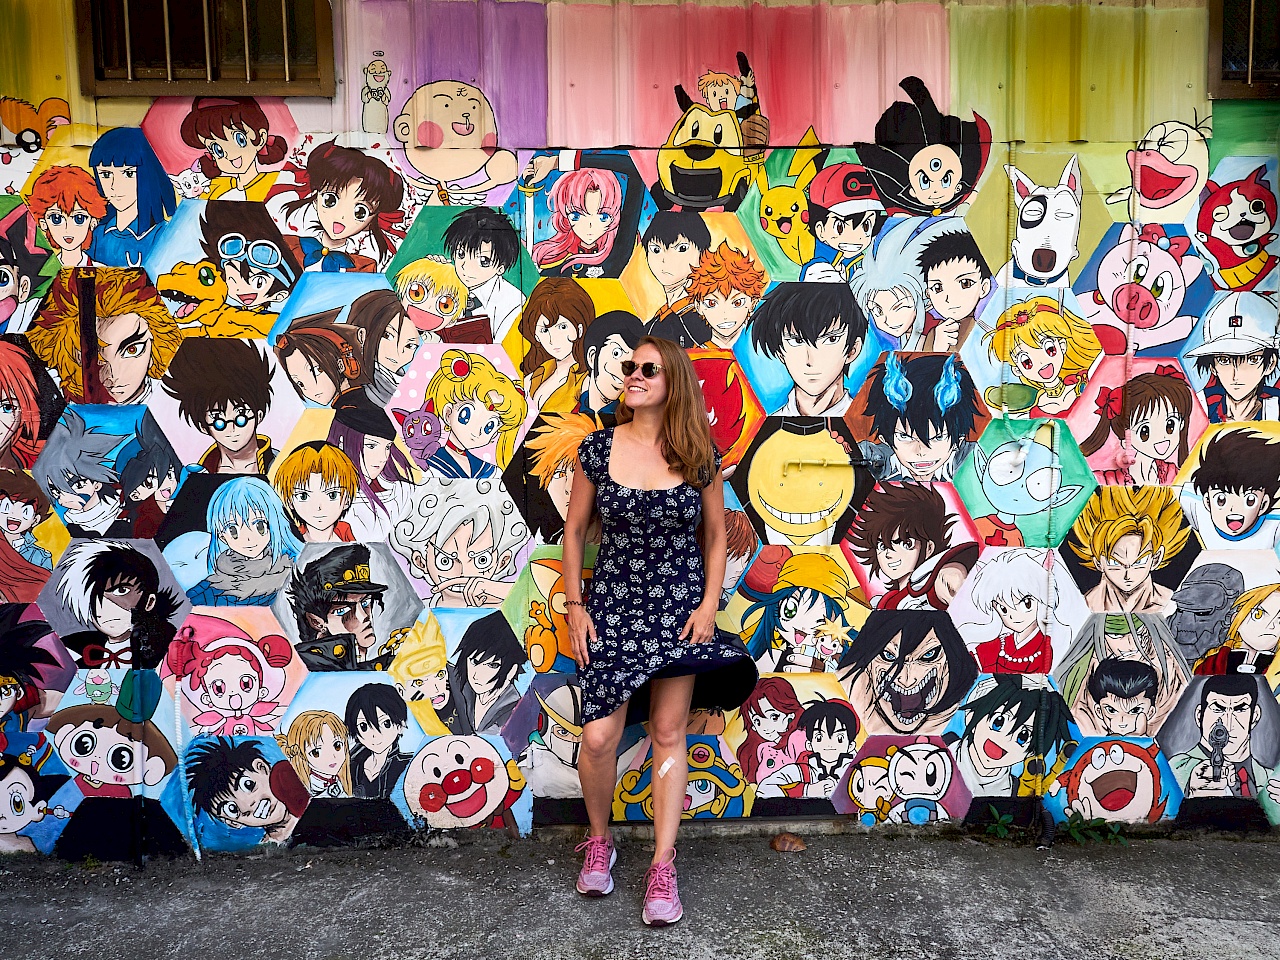 Painted animation Lane in Taichung (Taiwan)